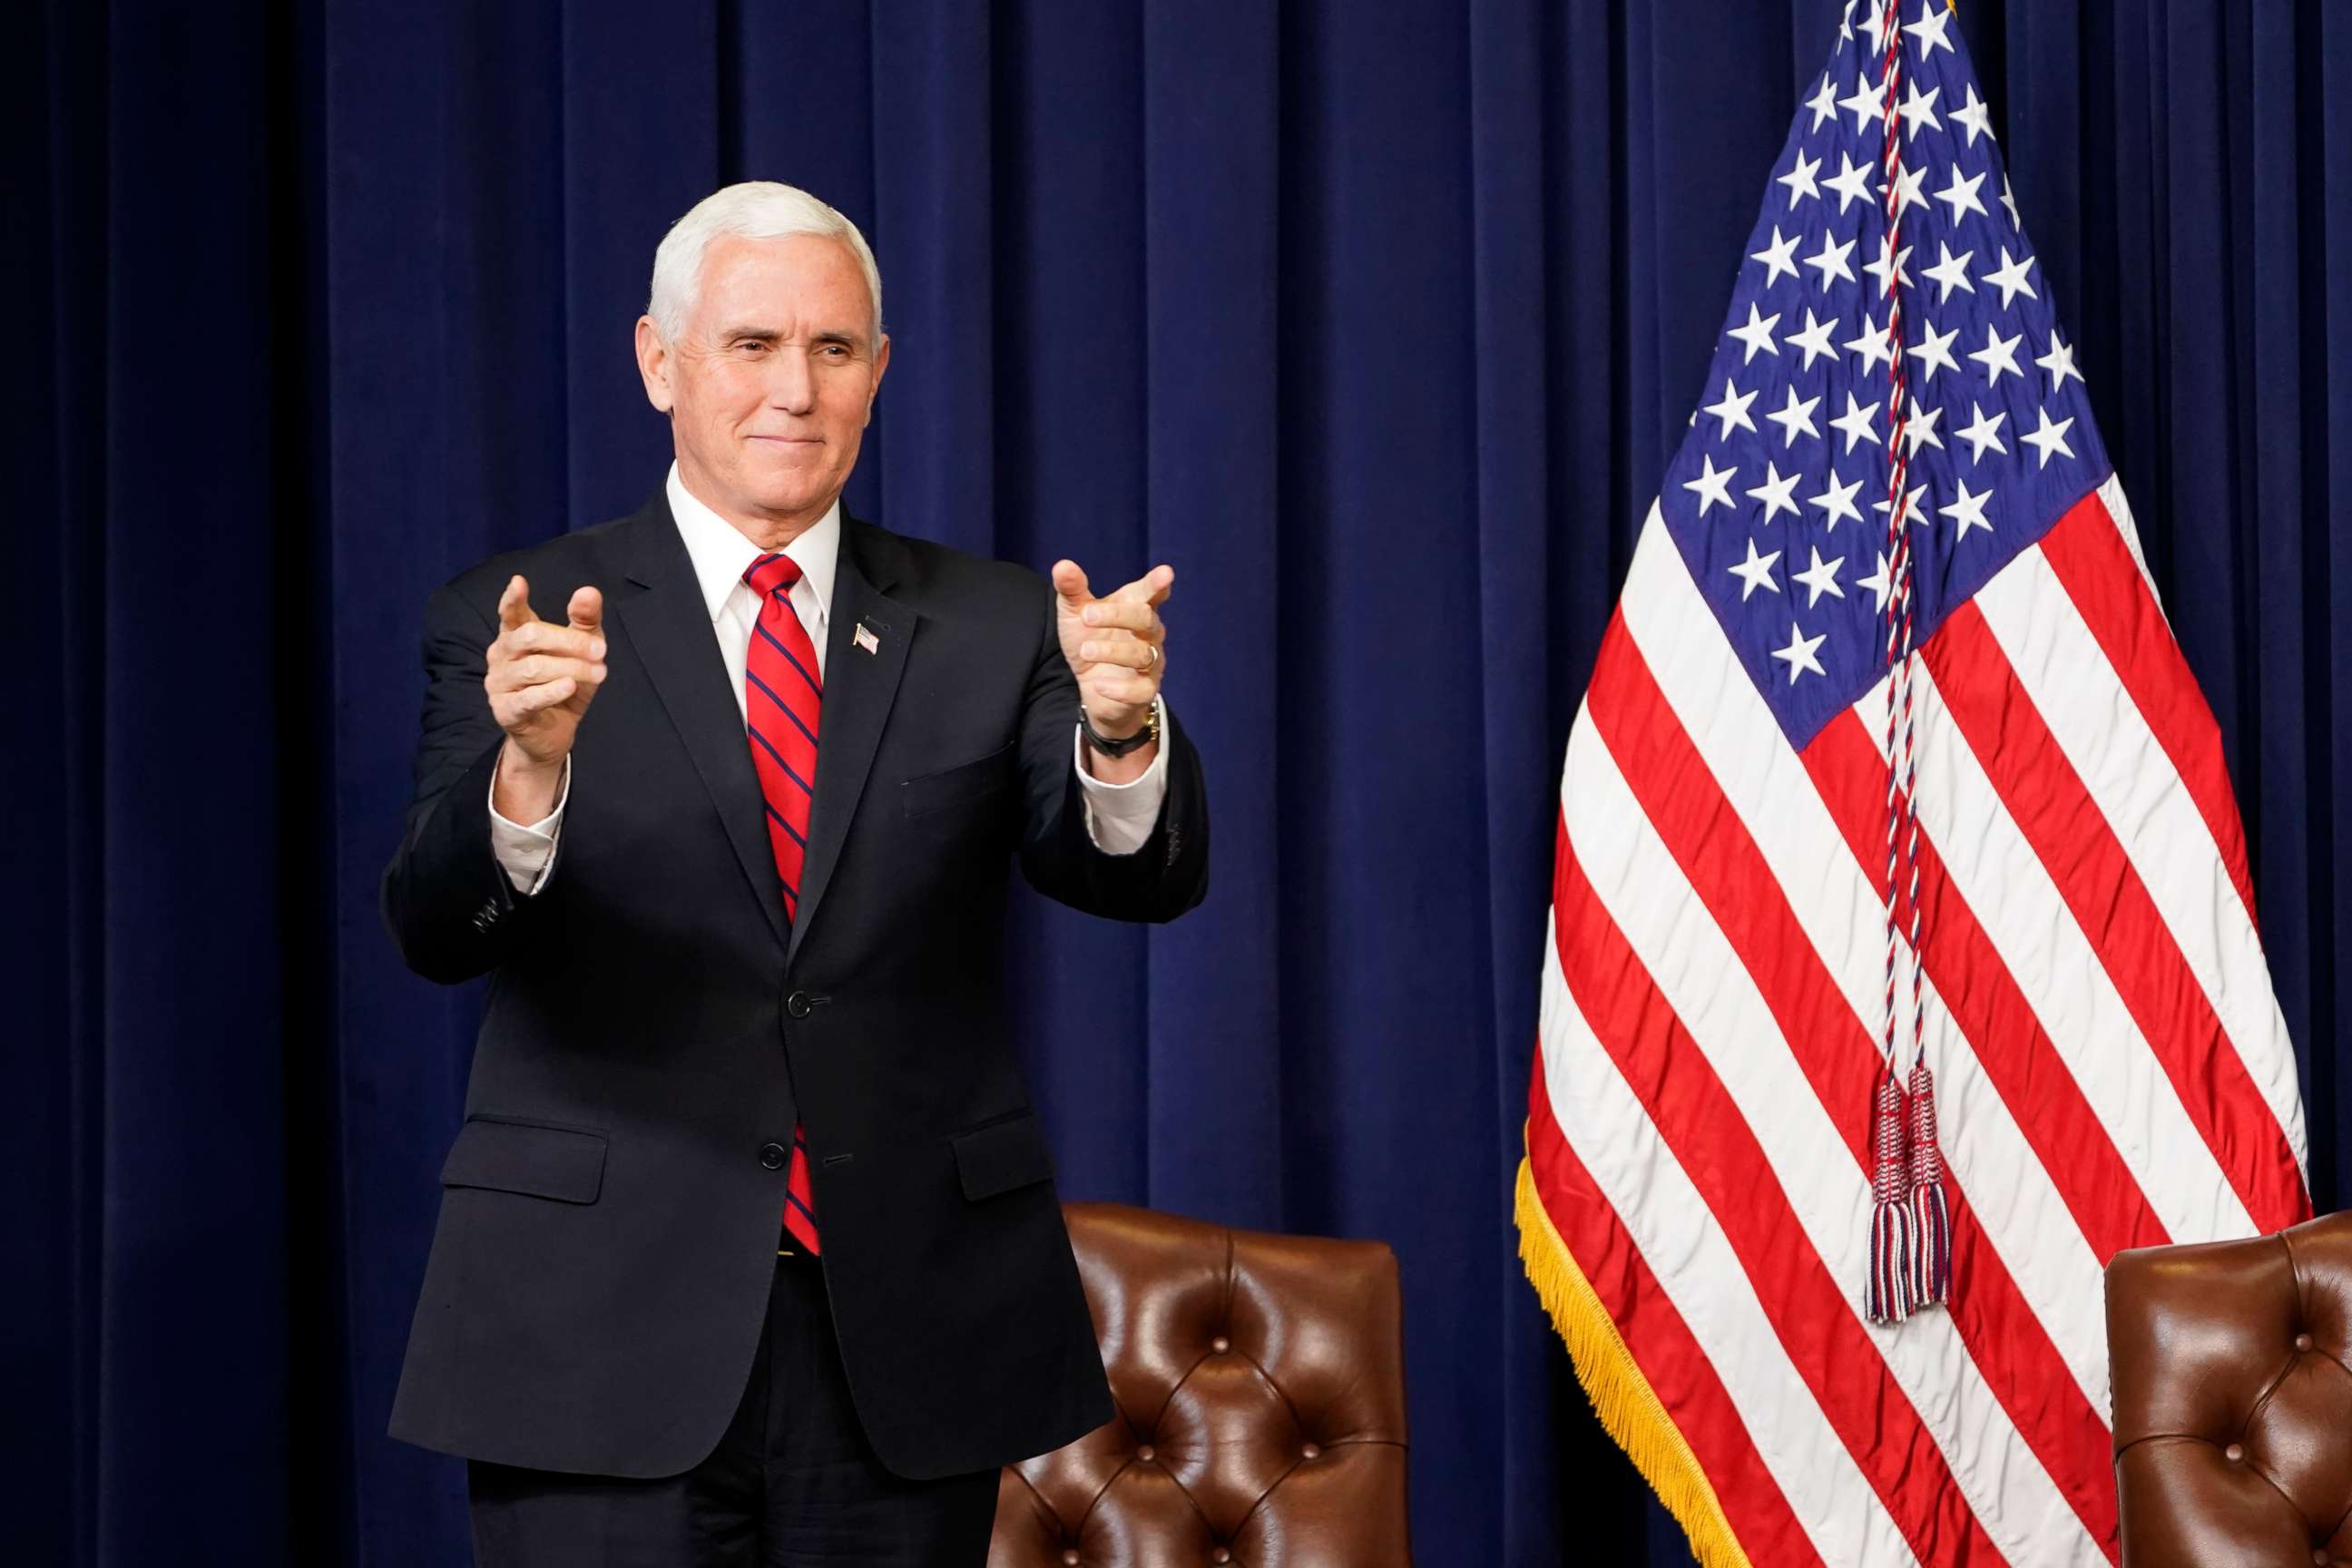 PHOTO: Vice President Mike Pence arrives to speak at a Life Is Winning event in the South Court Auditorium on the White House complex in Washington, Dec. 16, 2020.